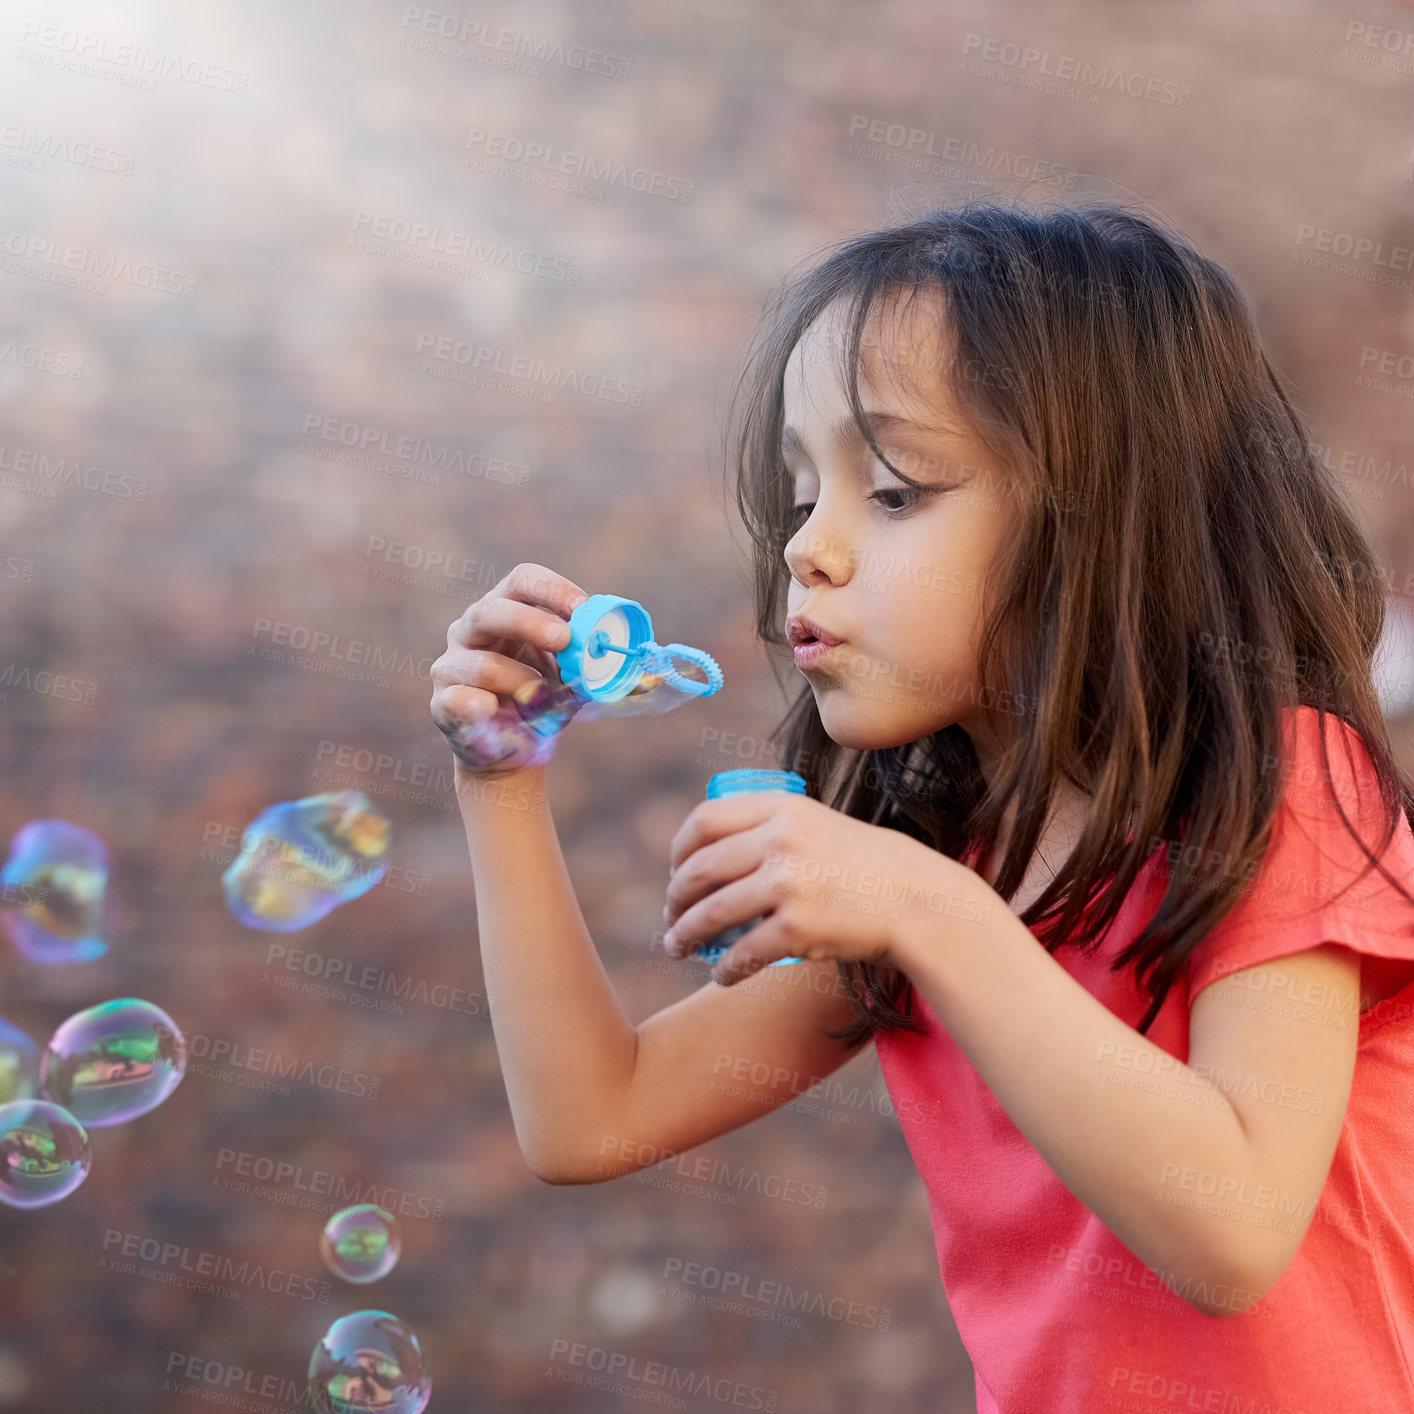 Buy stock photo Blowing, bubbles and girl outdoor relax in summer with magic, toys or fun on vacation or holiday. Childhood, memory and child with breathe in foam or soap in backyard, garden or park with peace